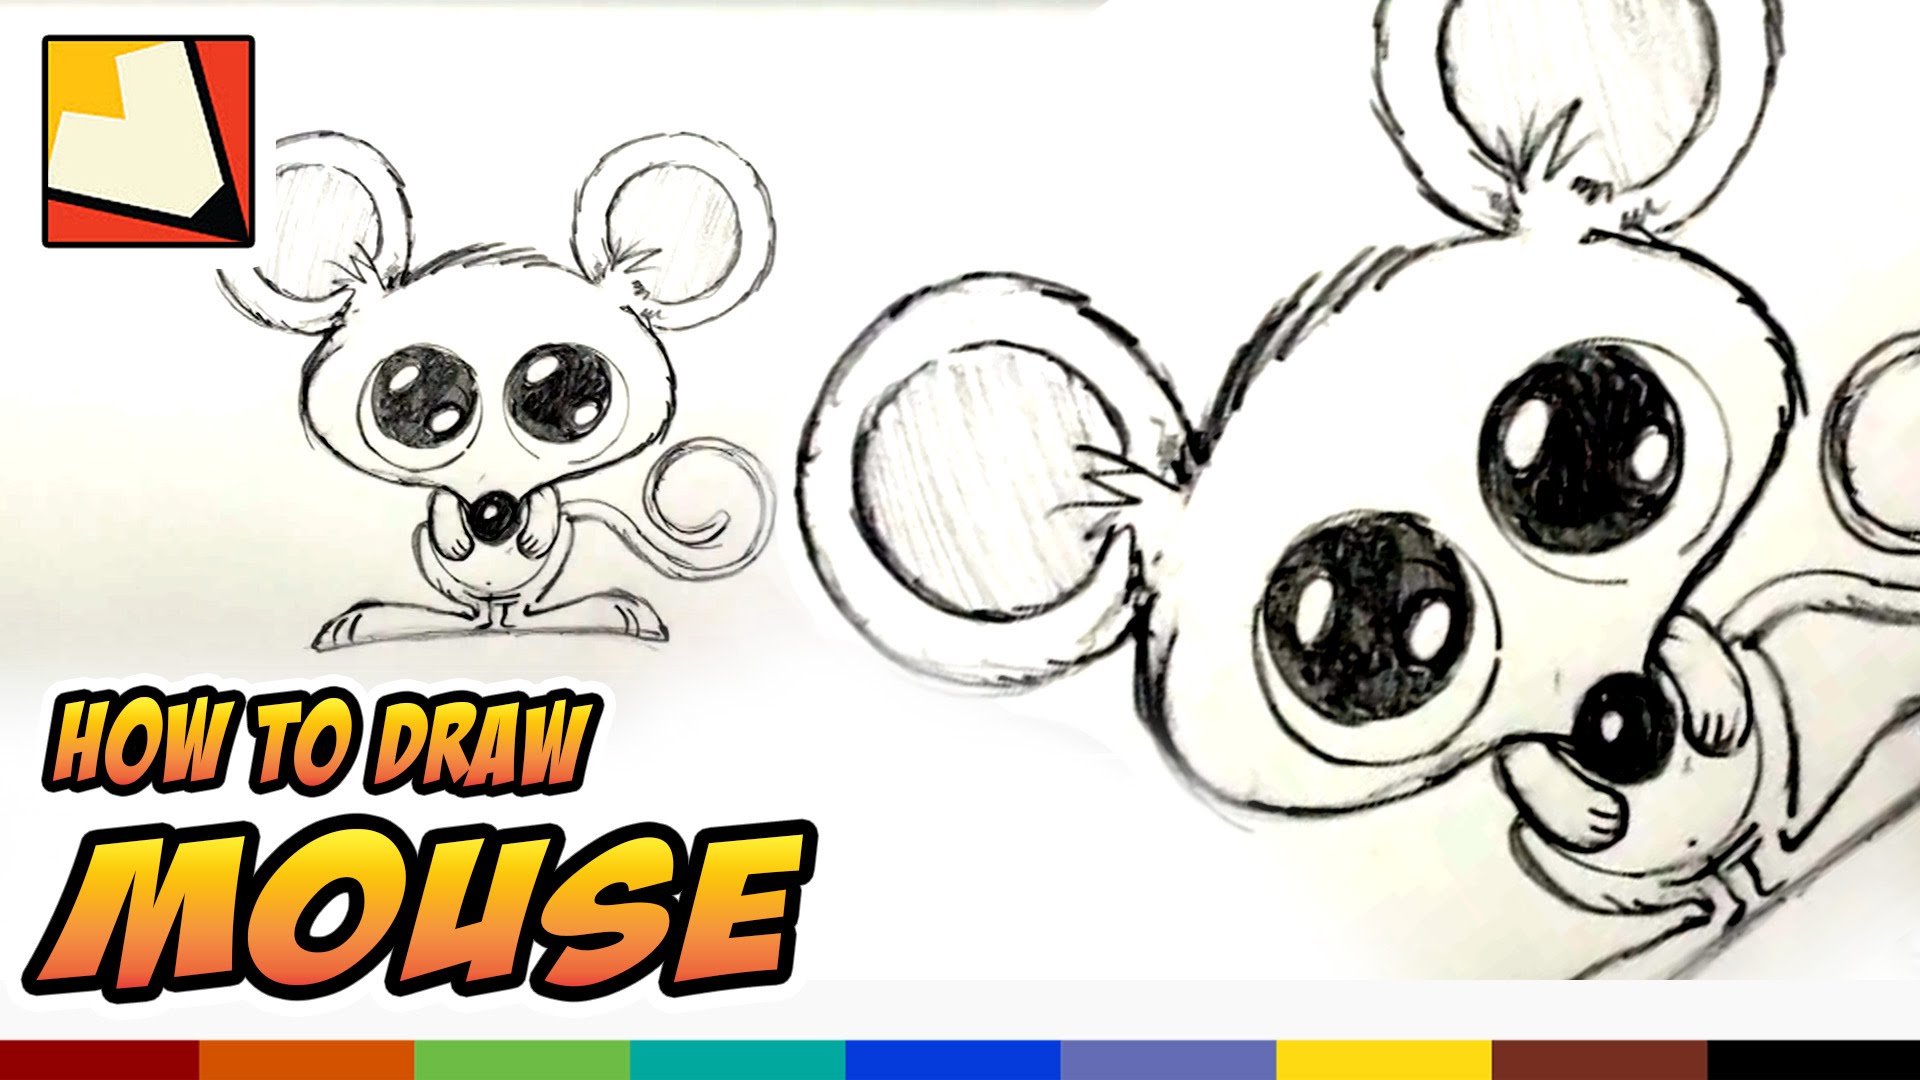 How to Draw a Mouse - Easy Cartoon Mouse Drawing Lessons for Kids ...